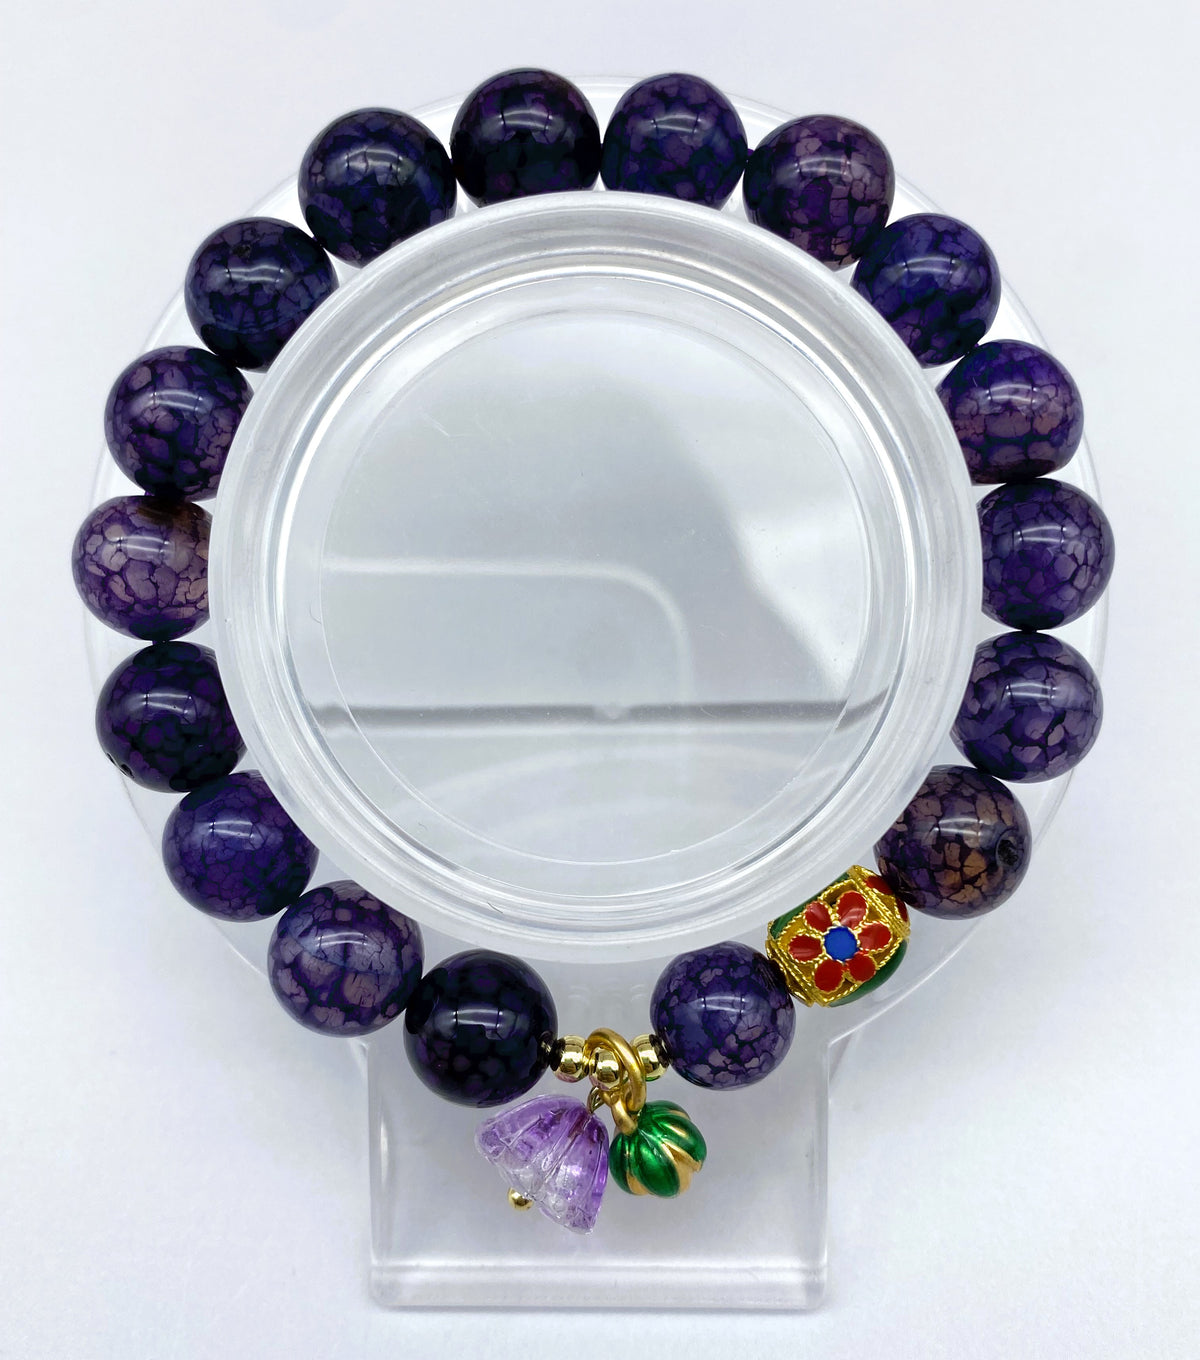 10mm 12mm Unique Design Dragon Vein Agate Bracelet Natural Stretch 7.5inches Healing Crystal